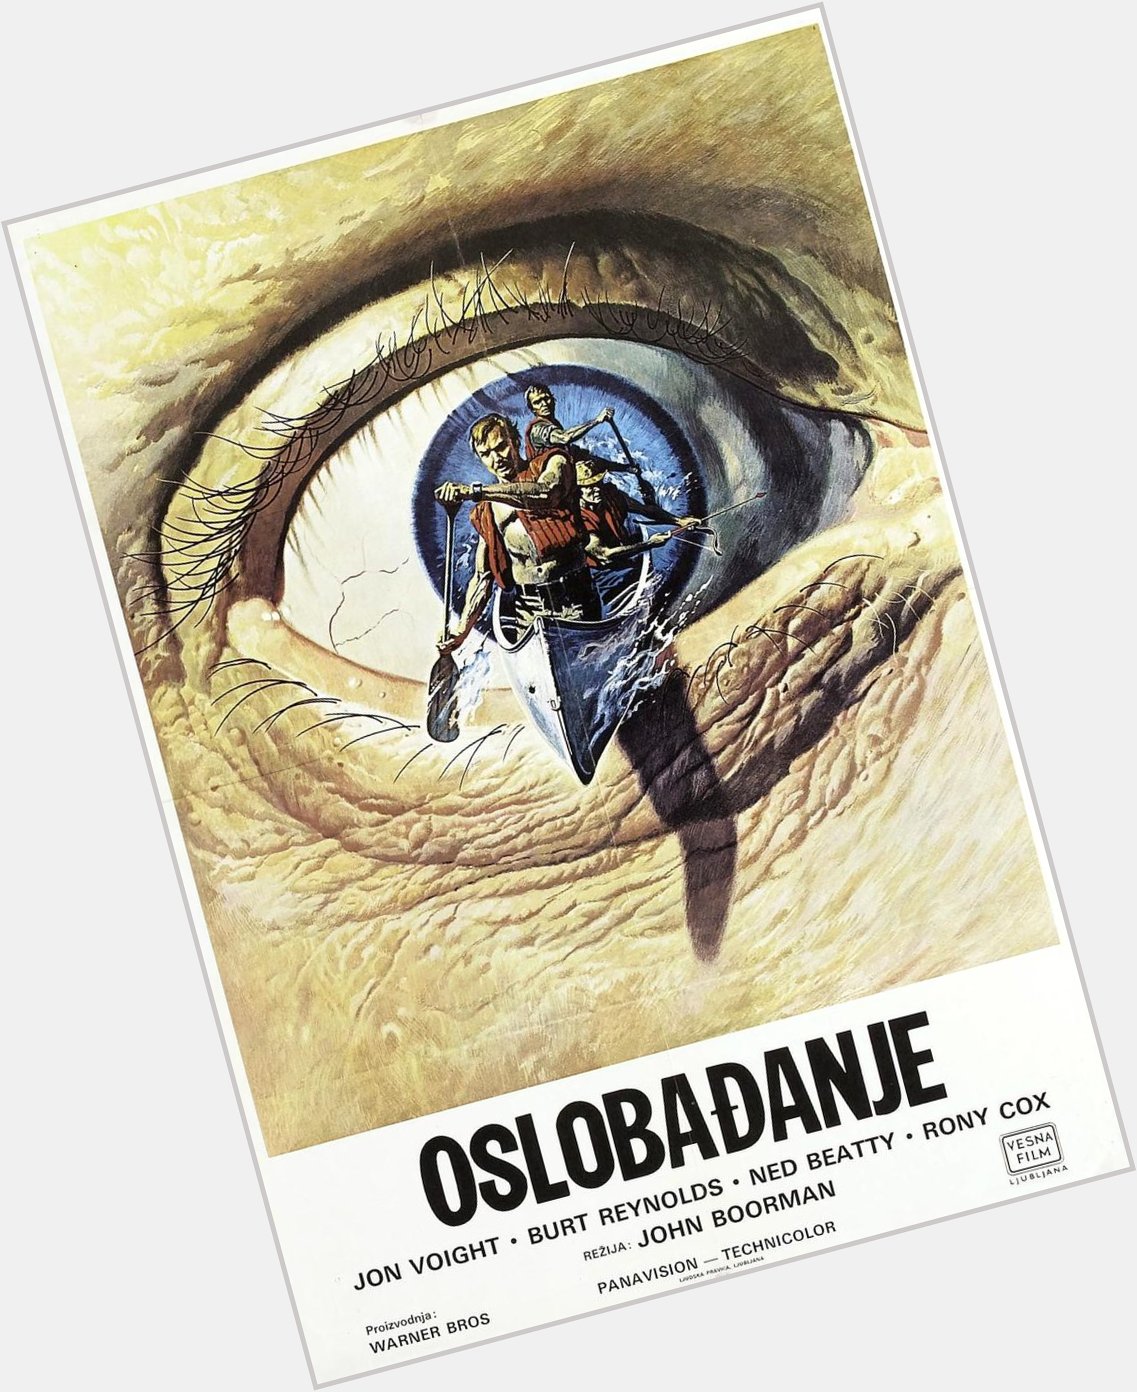 Happy Birthday Burt Reynolds! Here\s the Yugoslavian poster for DELIVERANCE, screening this week 